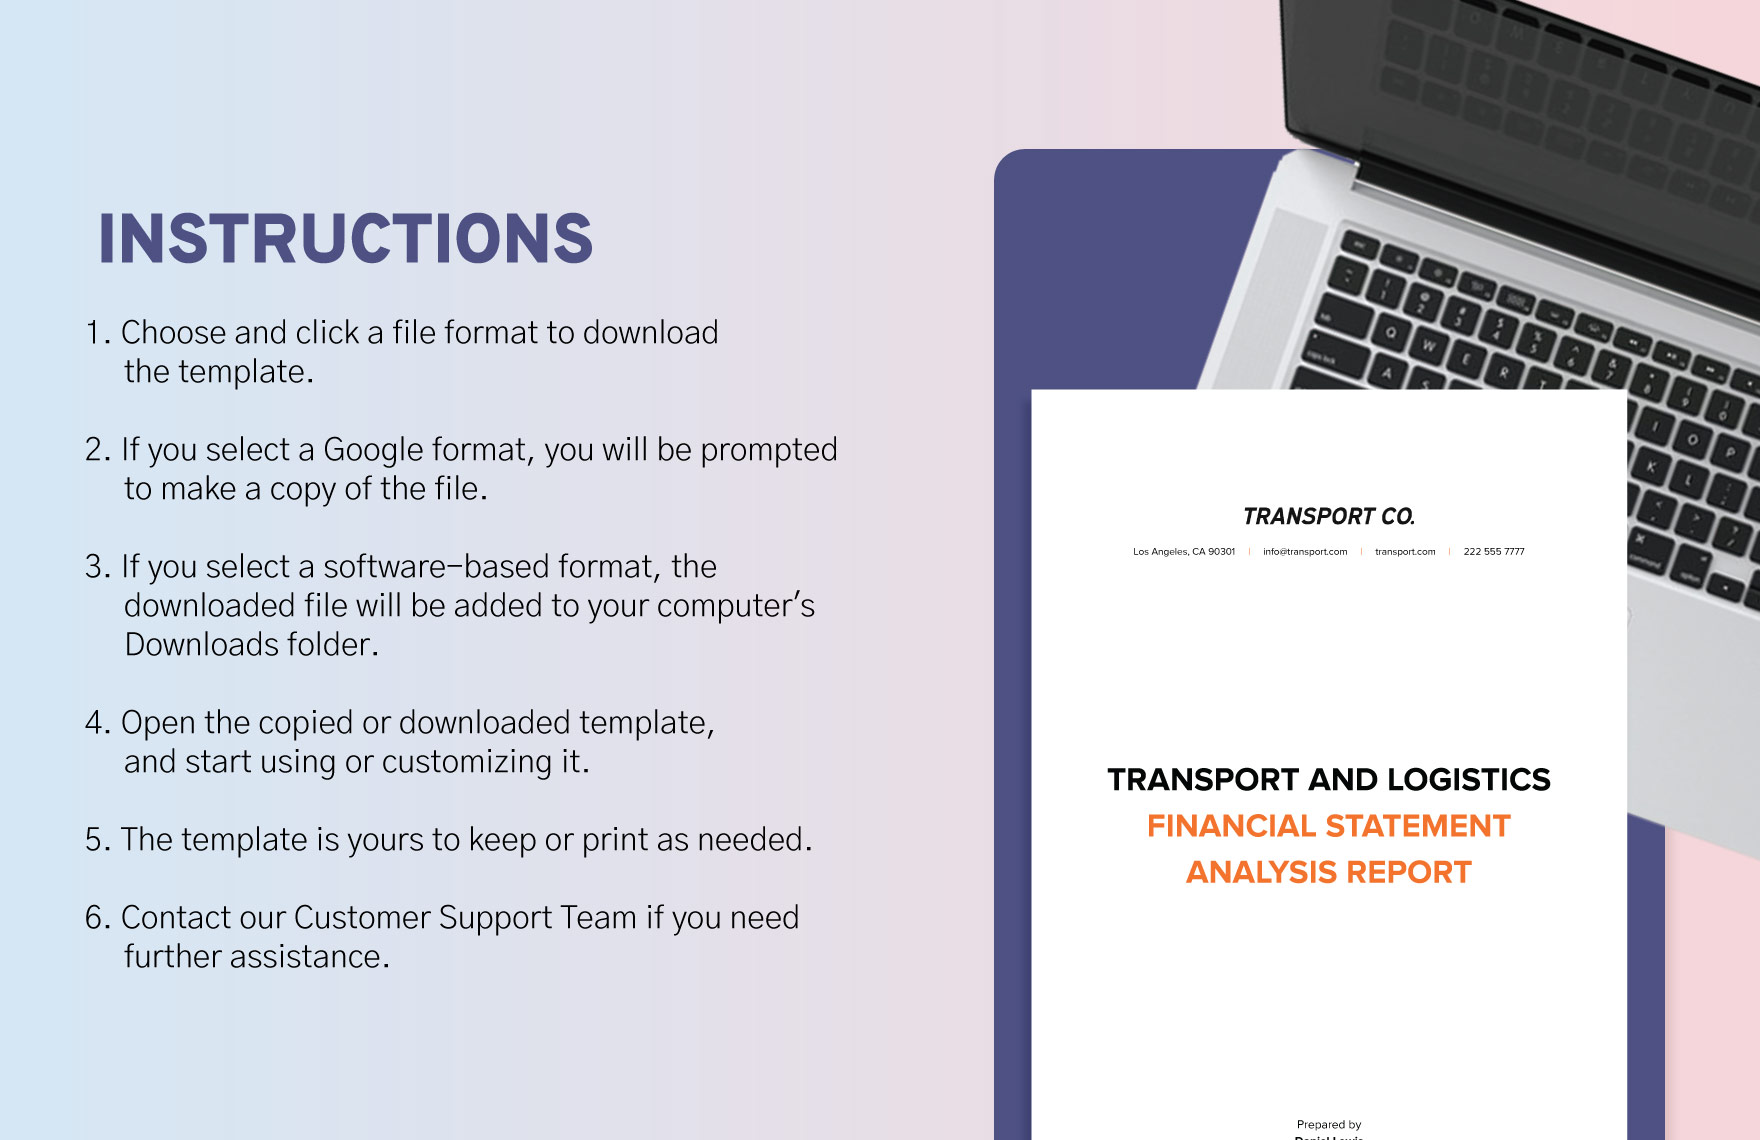 Transport and Logistics Financial Statement Analysis Report Template